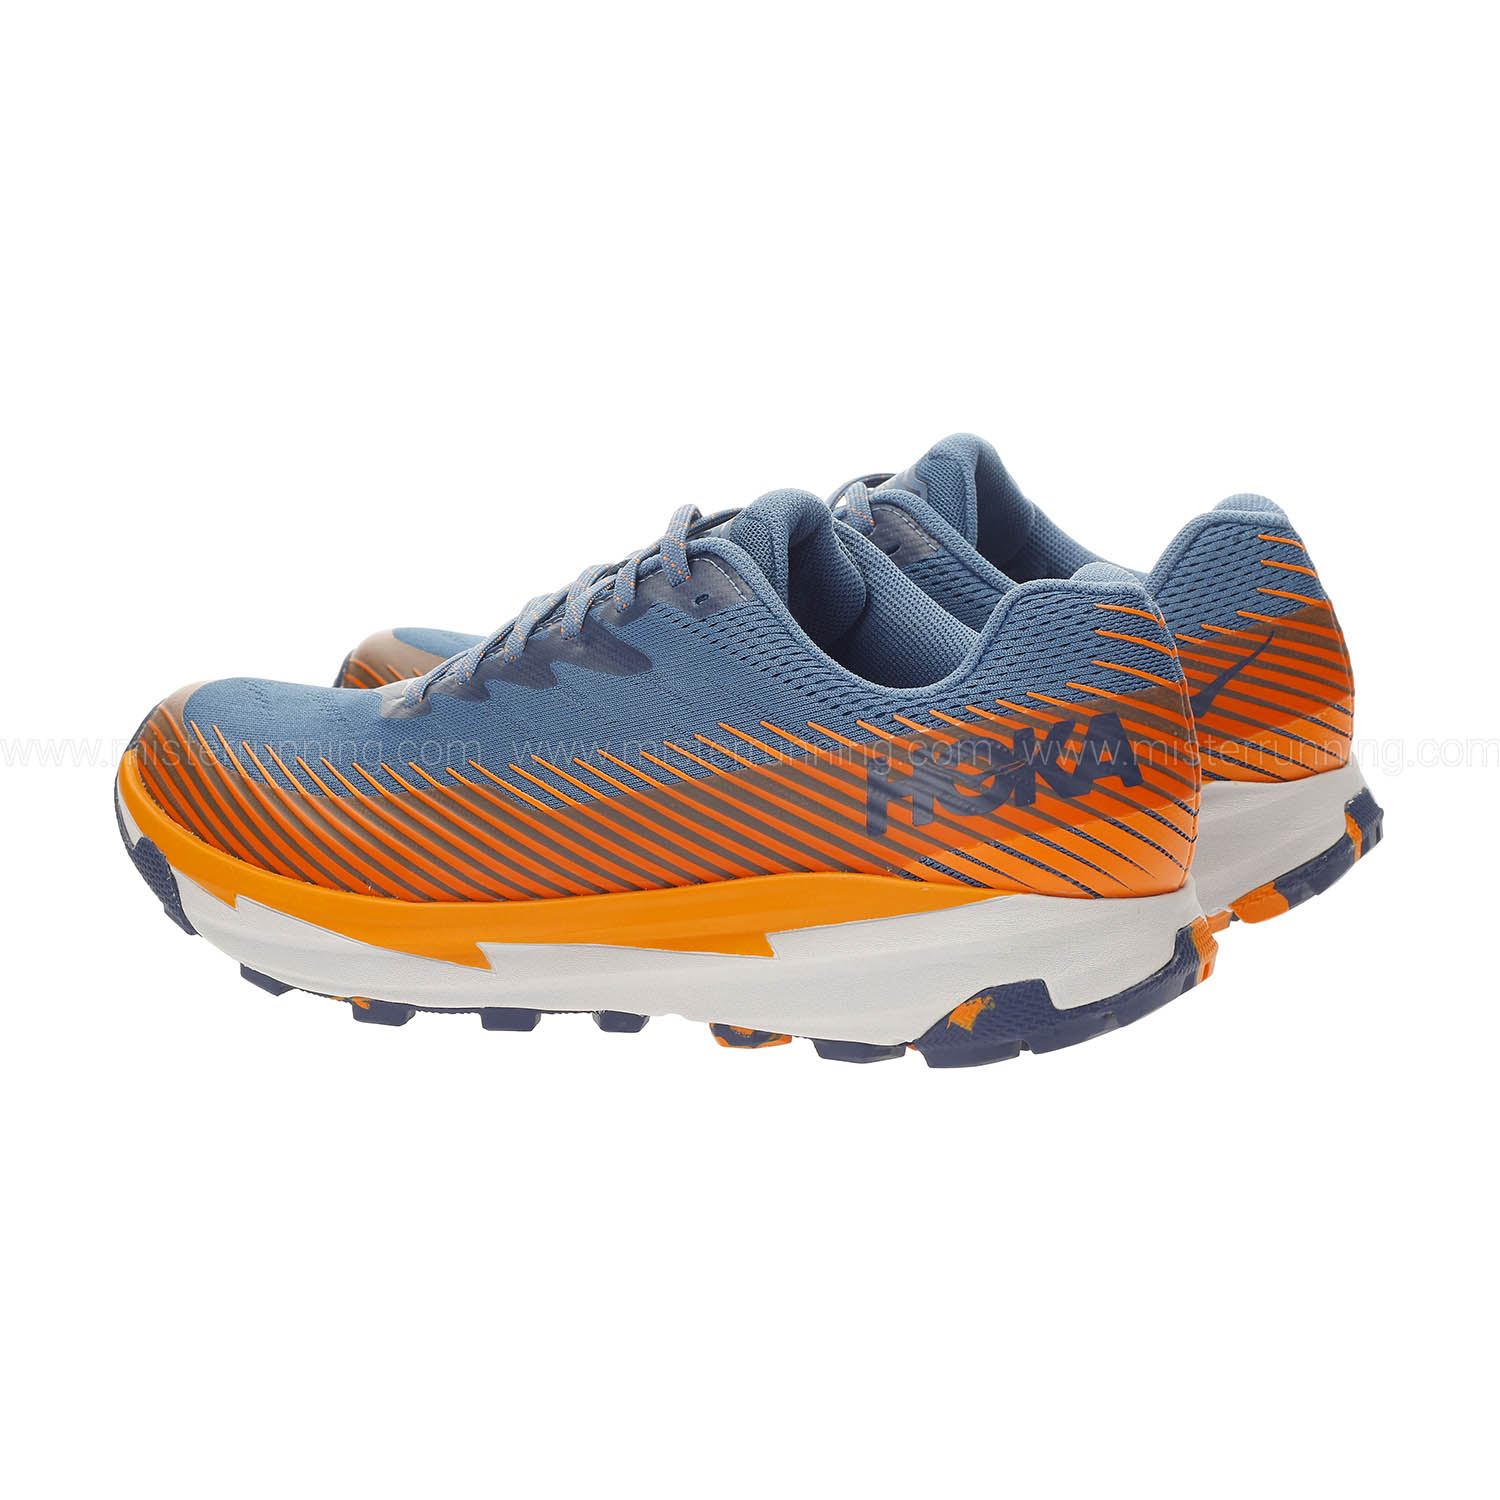 Hoka One One Torrent 2 Men's Trail Shoes - Real Teal/Harbor Mist